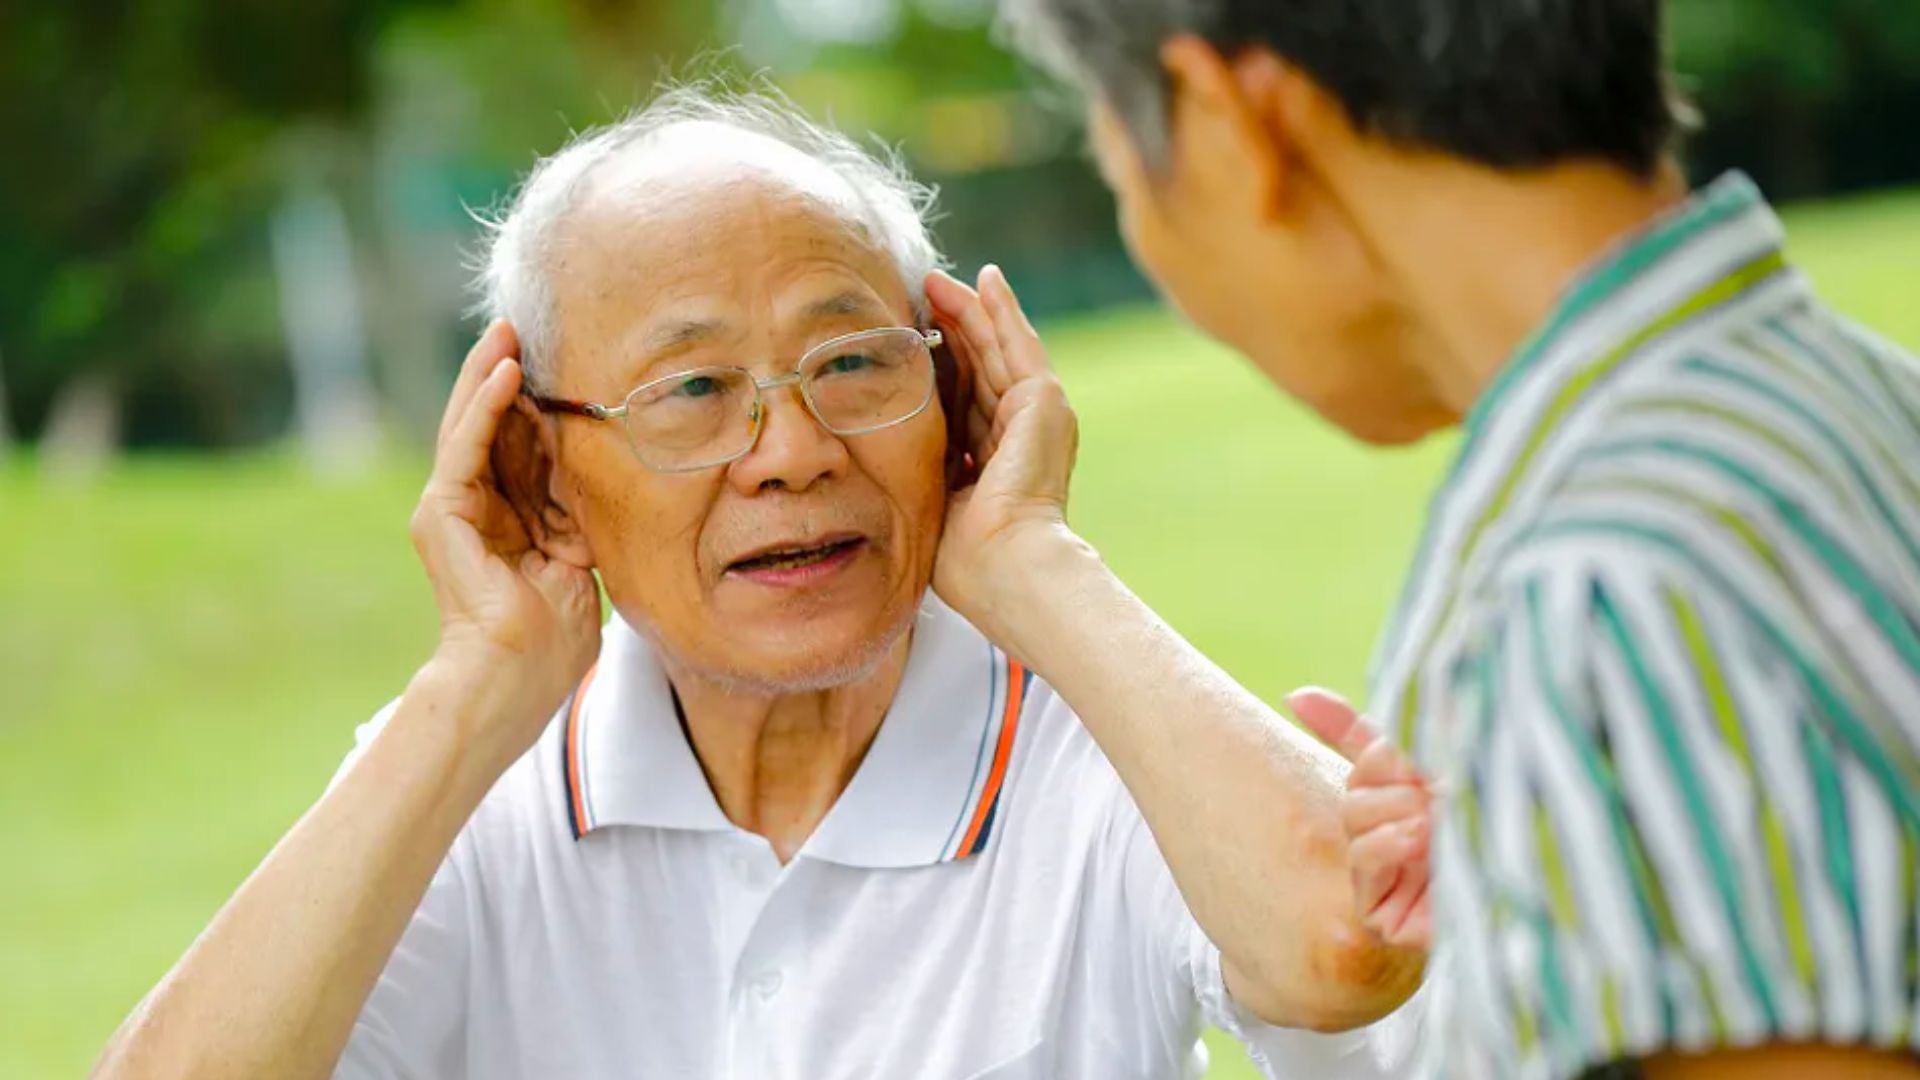 Do You Have Presbycusis - Age-Related Hearing Loss?